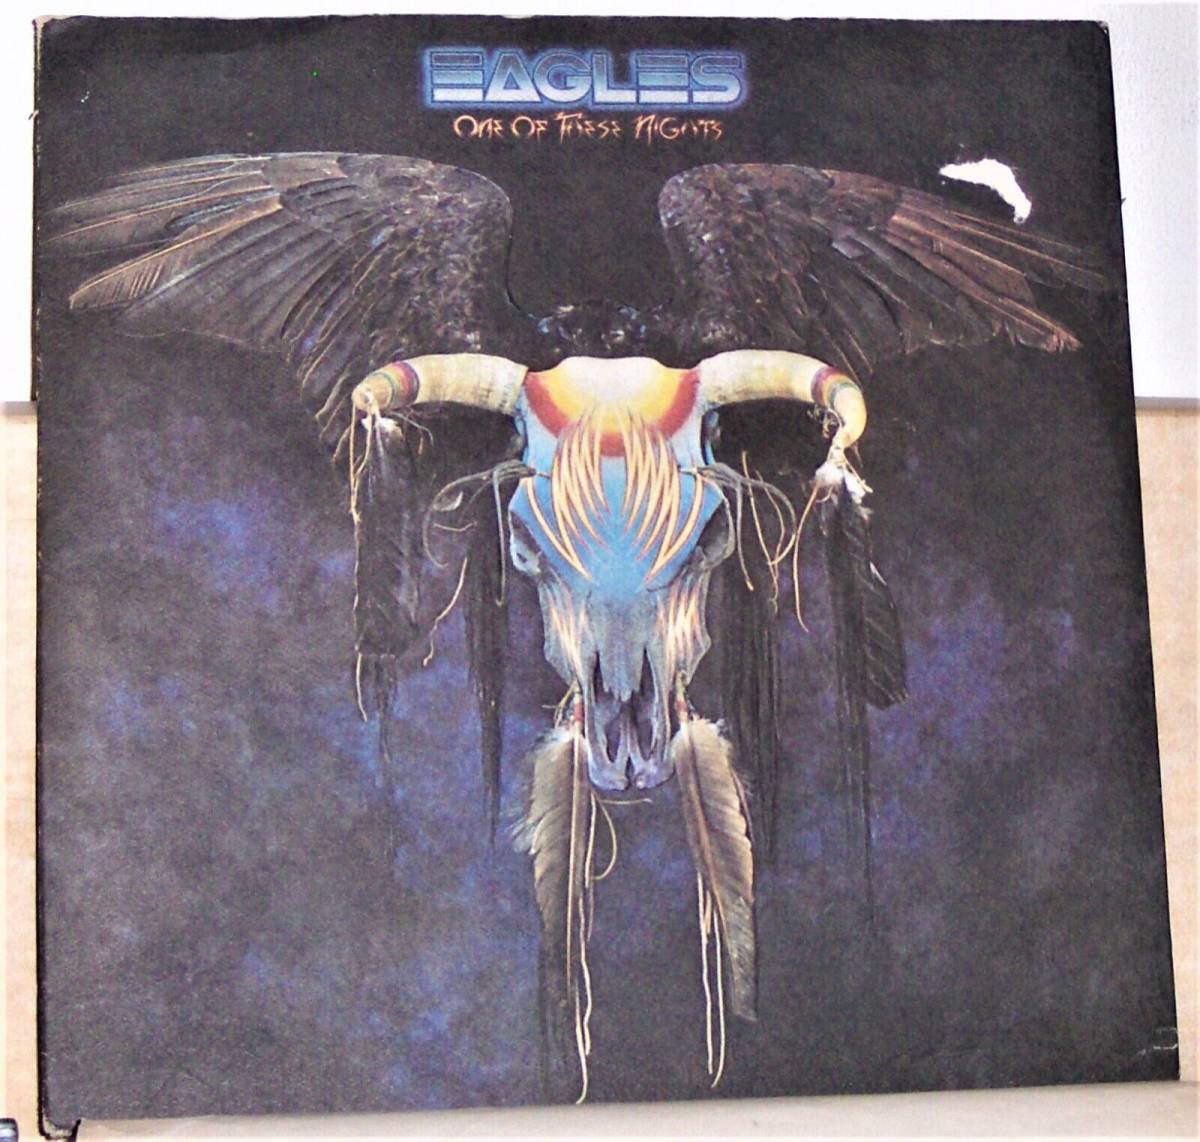 Eagles One Of These Nights - 1975 Vinyl LP Record Album with Embosed Cover 海外 即決